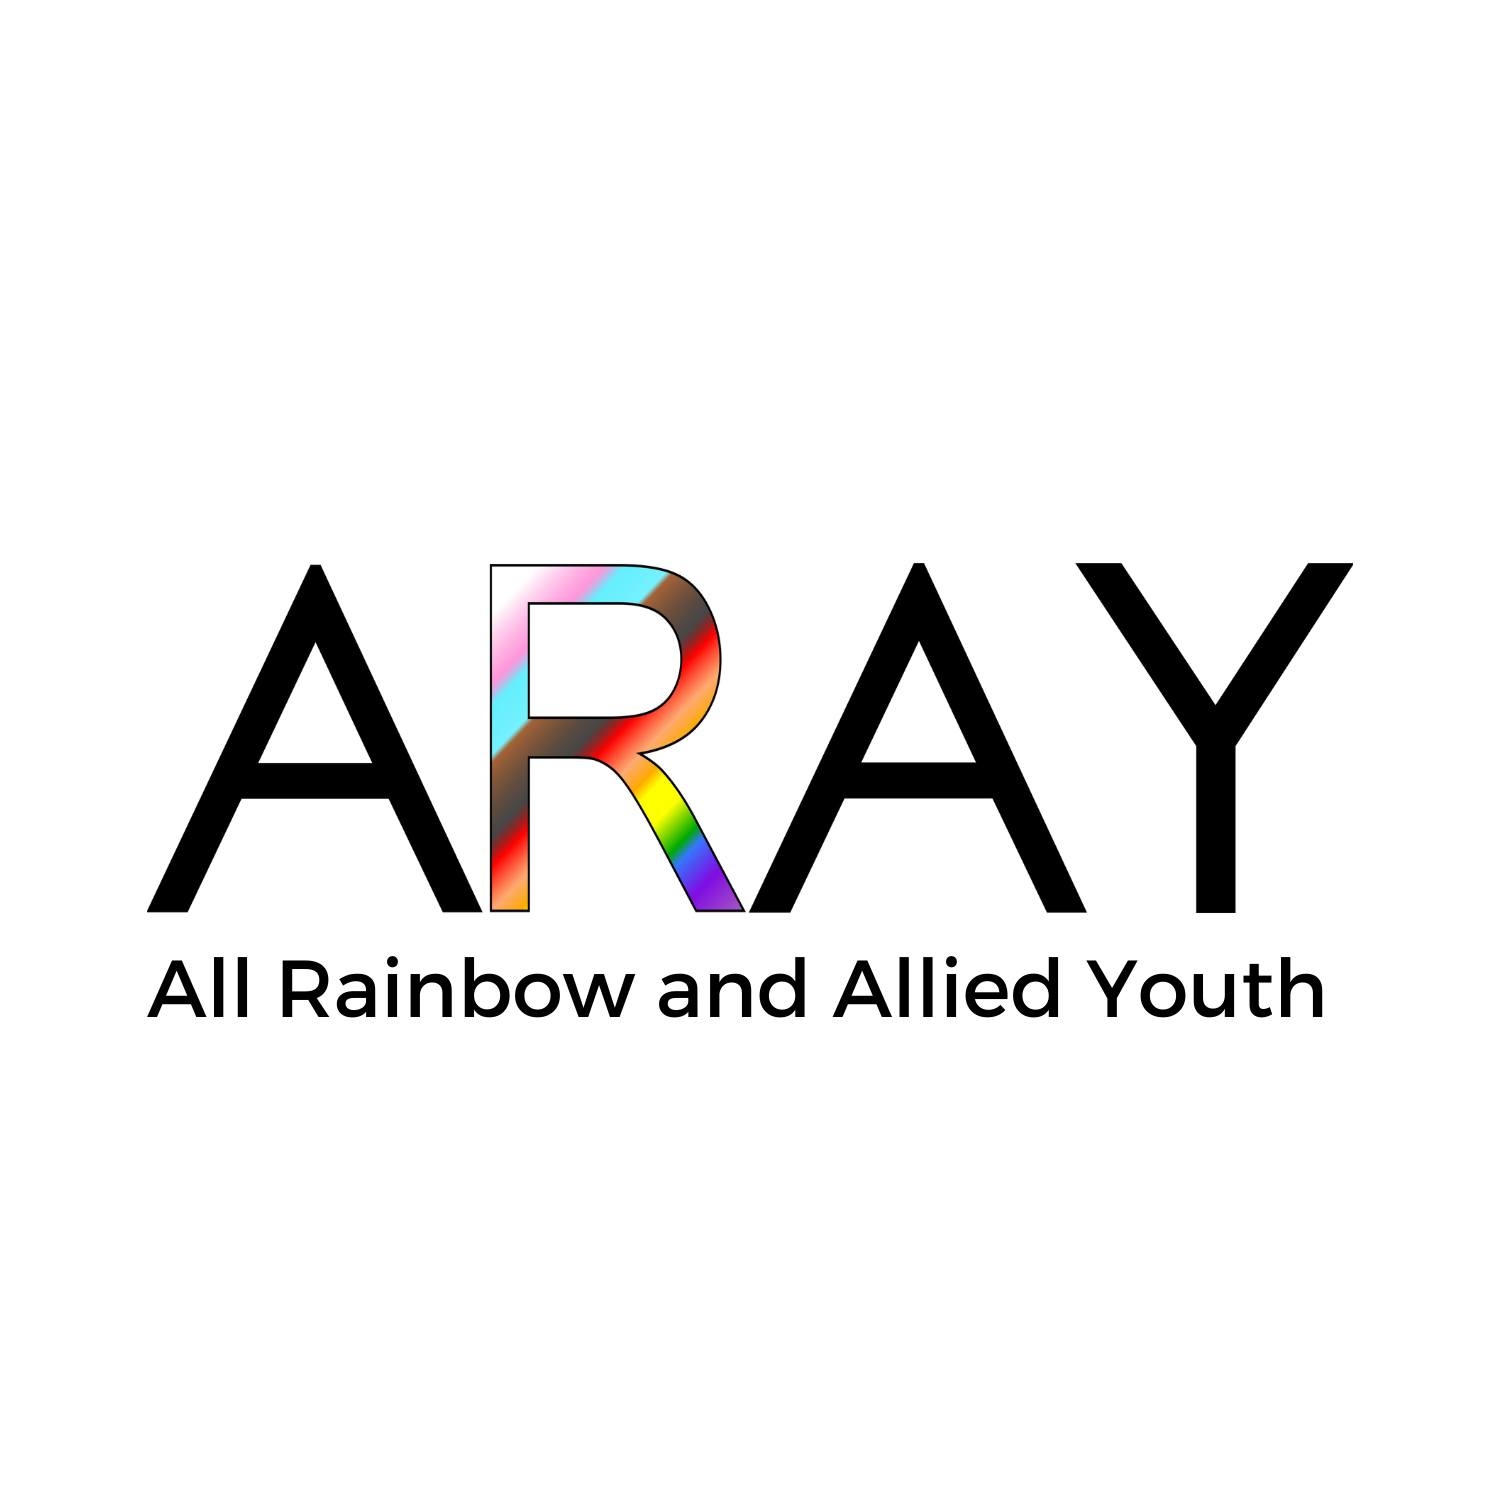 LGBTQ Organizations in Florida - All Rainbow and Allied Youth